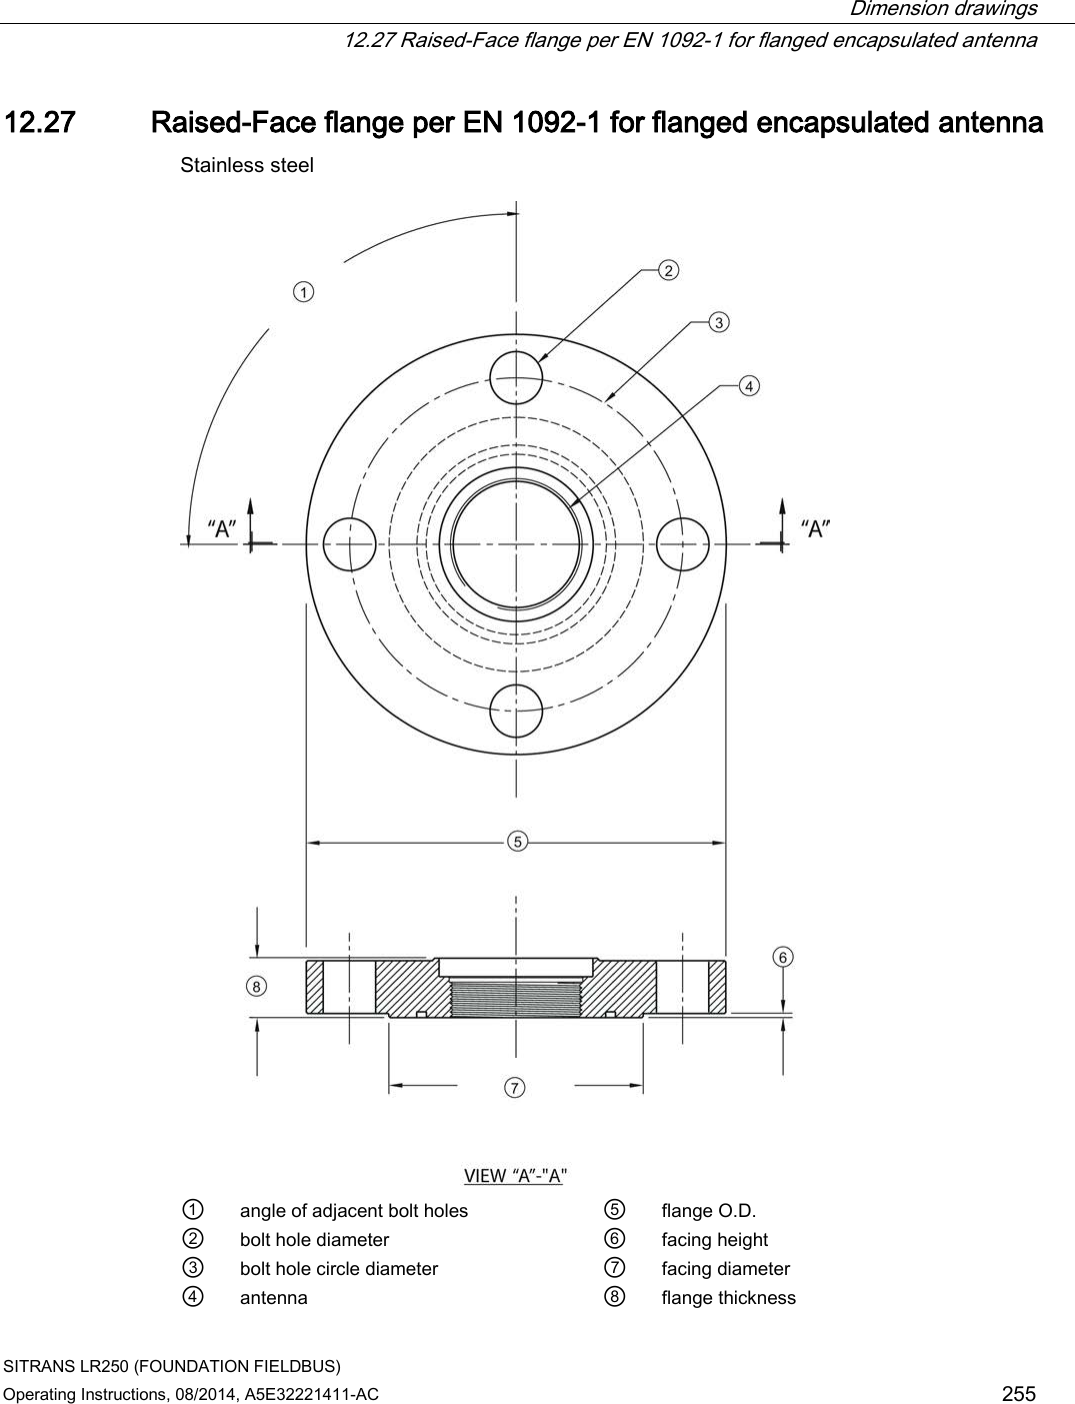  Dimension drawings  12.27 Raised-Face flange per EN 1092-1 for flanged encapsulated antenna SITRANS LR250 (FOUNDATION FIELDBUS) Operating Instructions, 08/2014, A5E32221411-AC 255 12.27 Raised-Face flange per EN 1092-1 for flanged encapsulated antenna Stainless steel  ① angle of adjacent bolt holes ⑤ flange O.D. ② bolt hole diameter ⑥ facing height ③ bolt hole circle diameter ⑦ facing diameter ④ antenna ⑧ flange thickness 